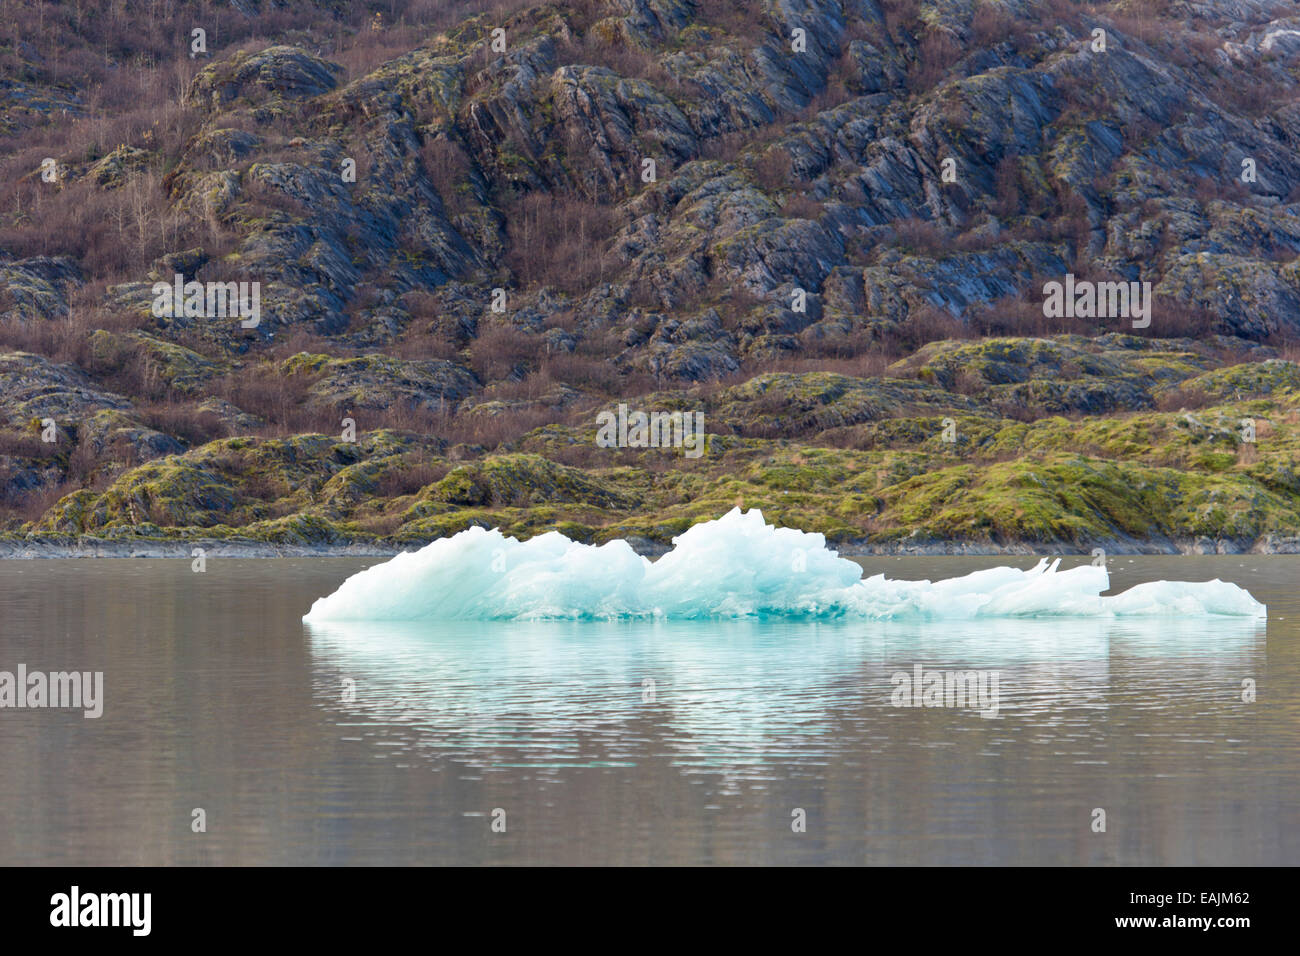 Ice on Mendenhall Glacier Lake displays hues of blue and reflect on the cold, glacial water. Stock Photo